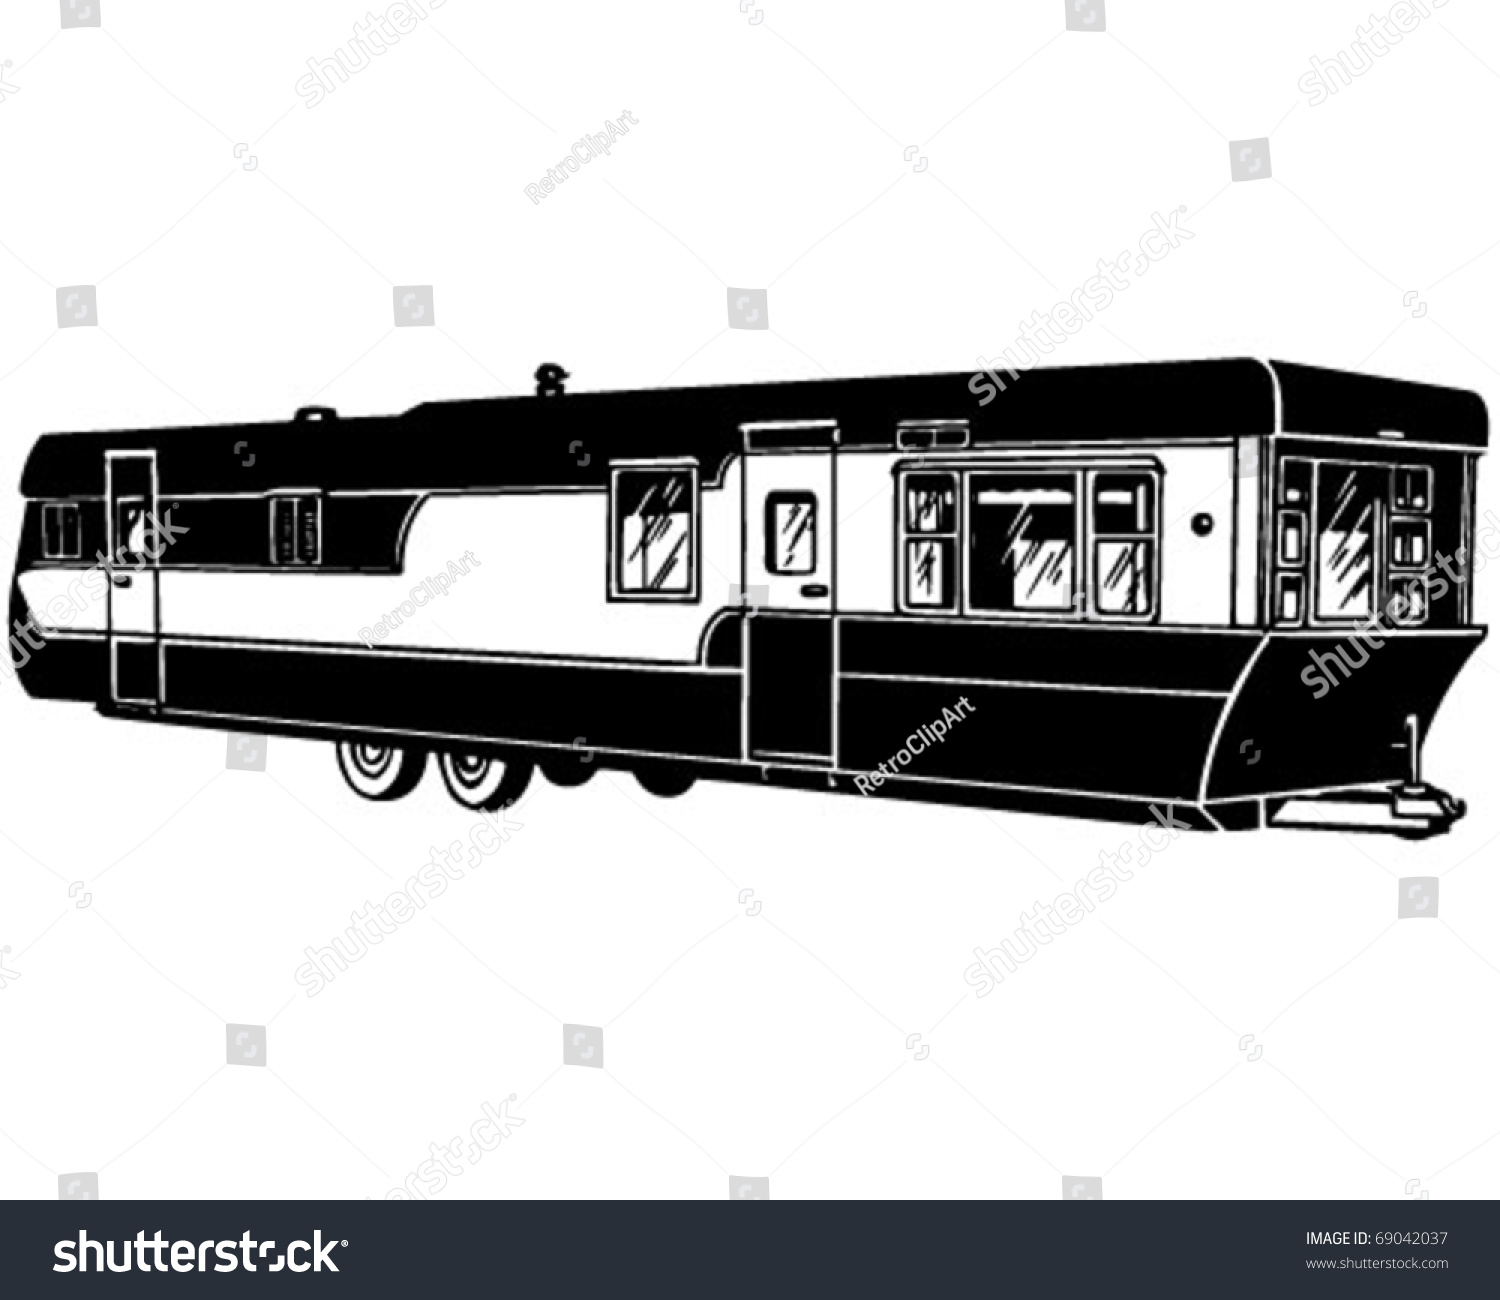 clipart mobile home - photo #12